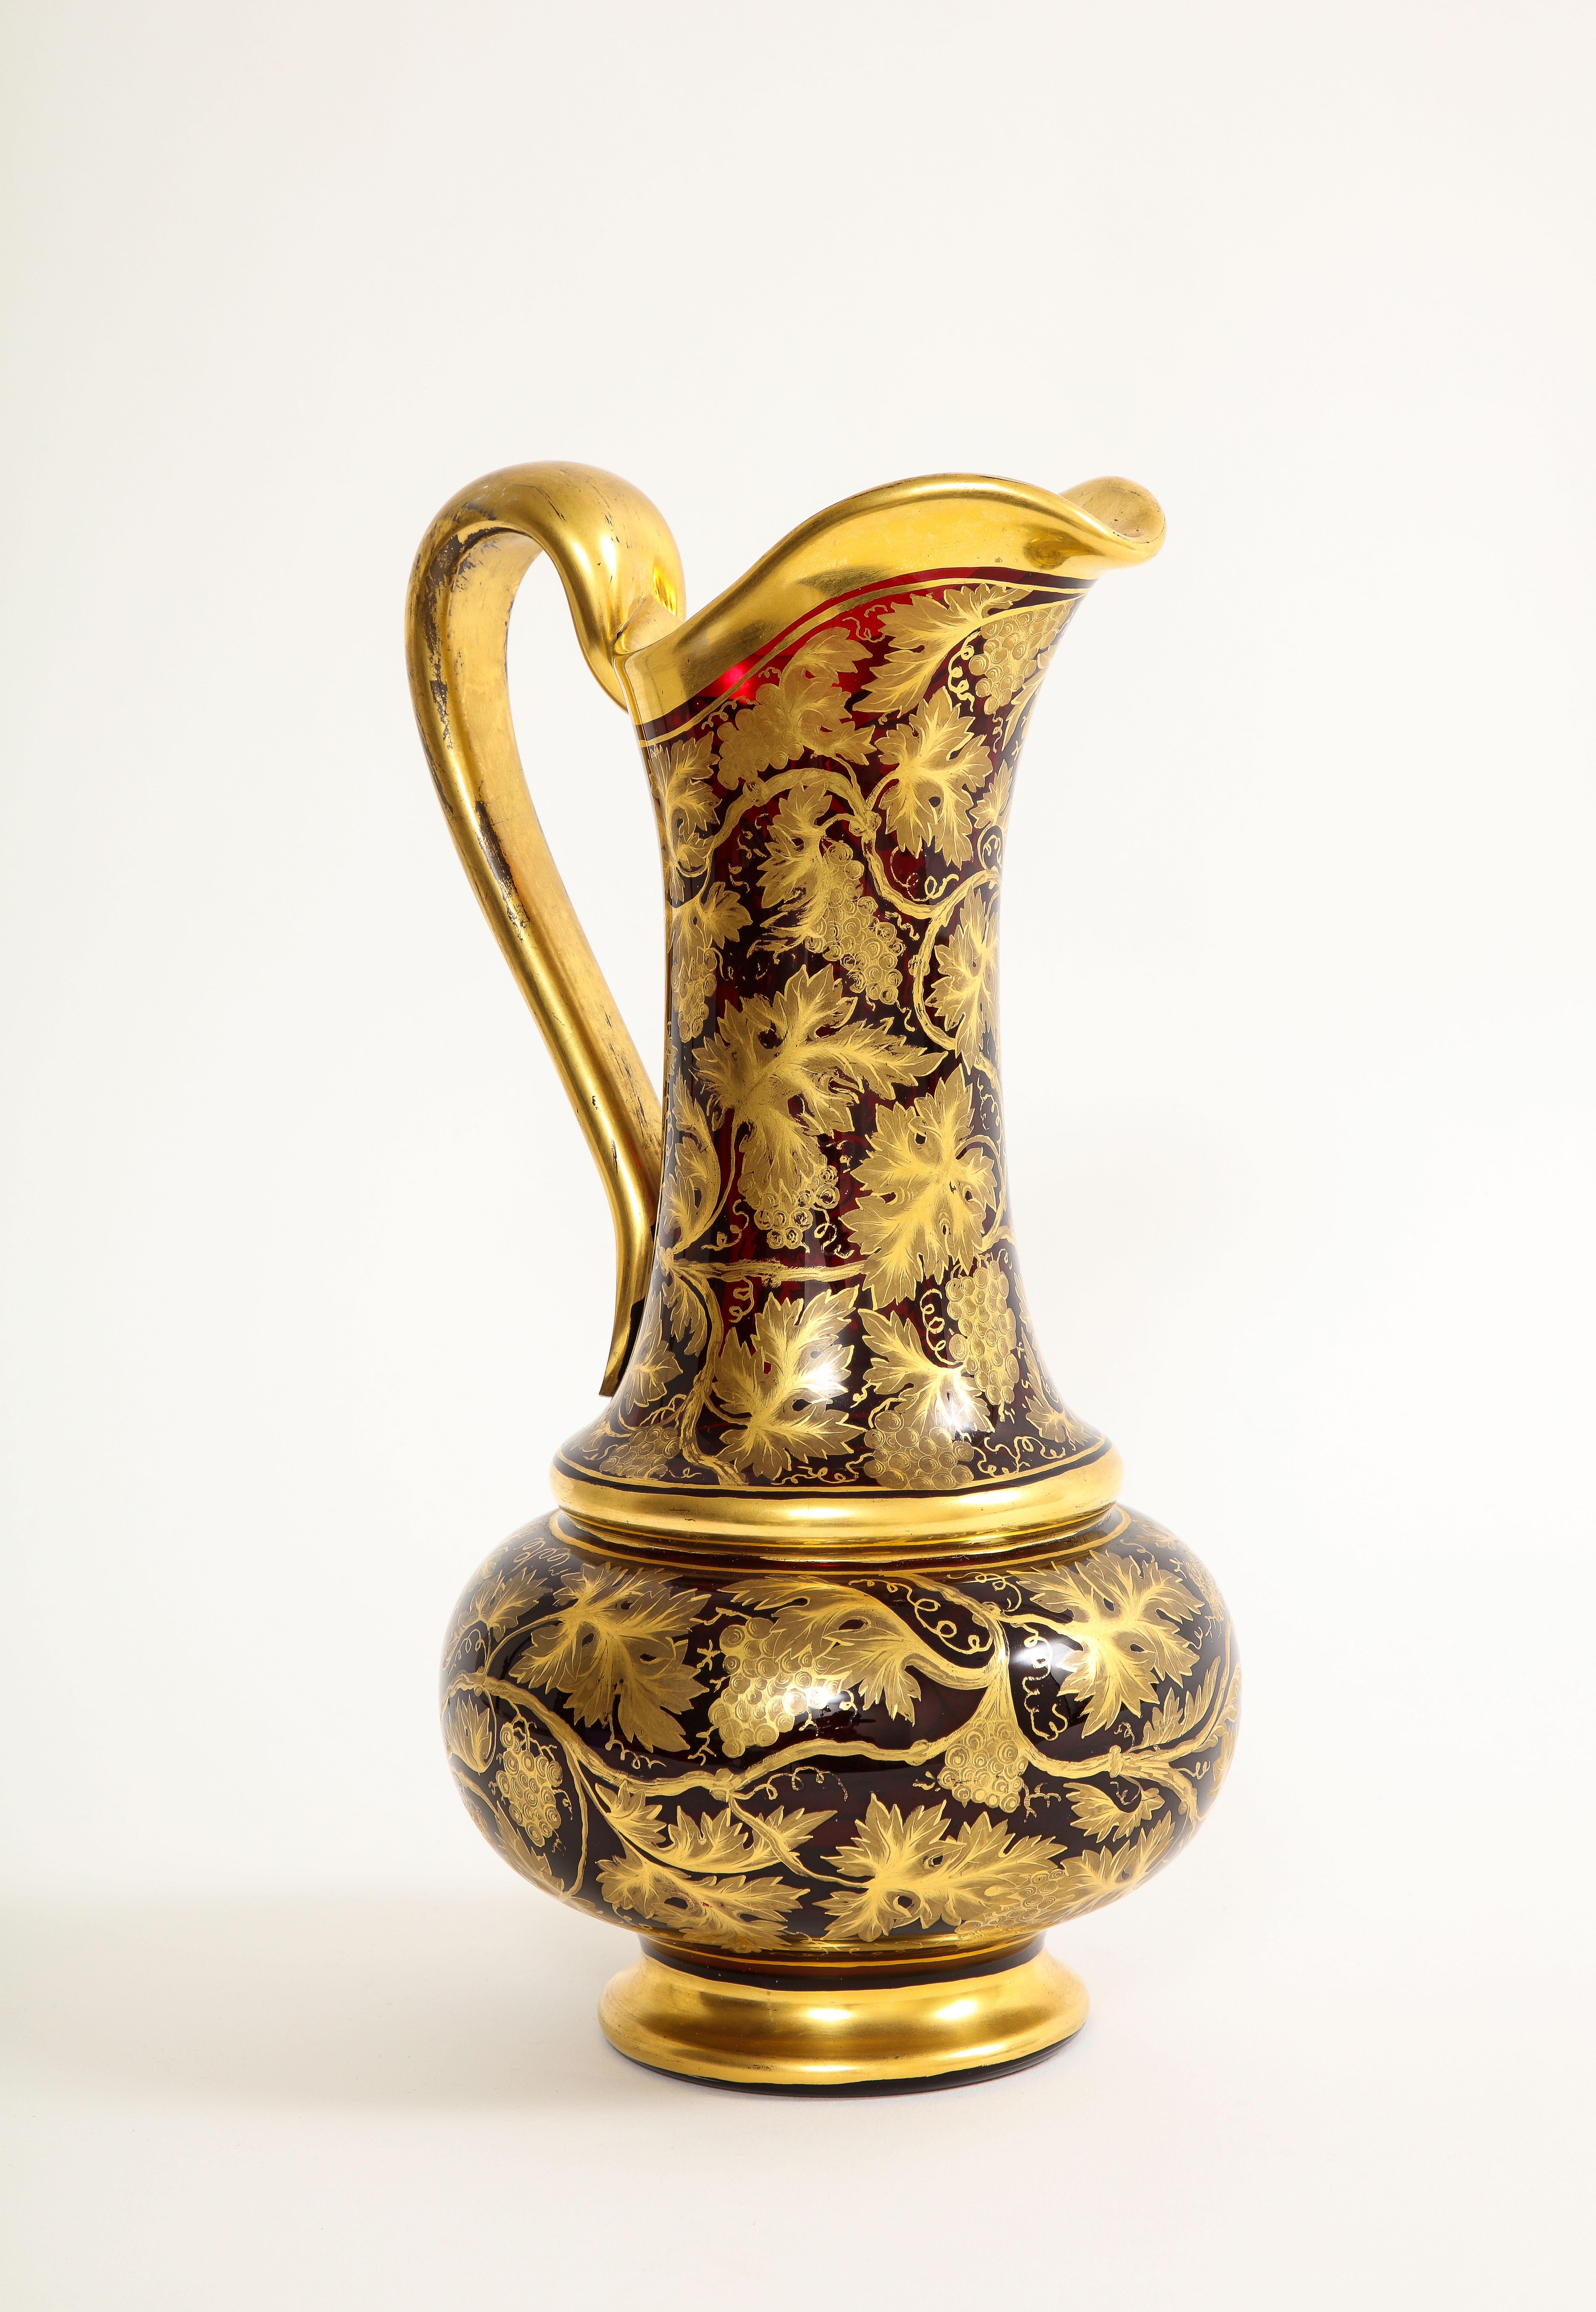 Marvelous 19th Century Bohemian Red Crystal & 24k Gold Decorated Ewer In Good Condition For Sale In New York, NY